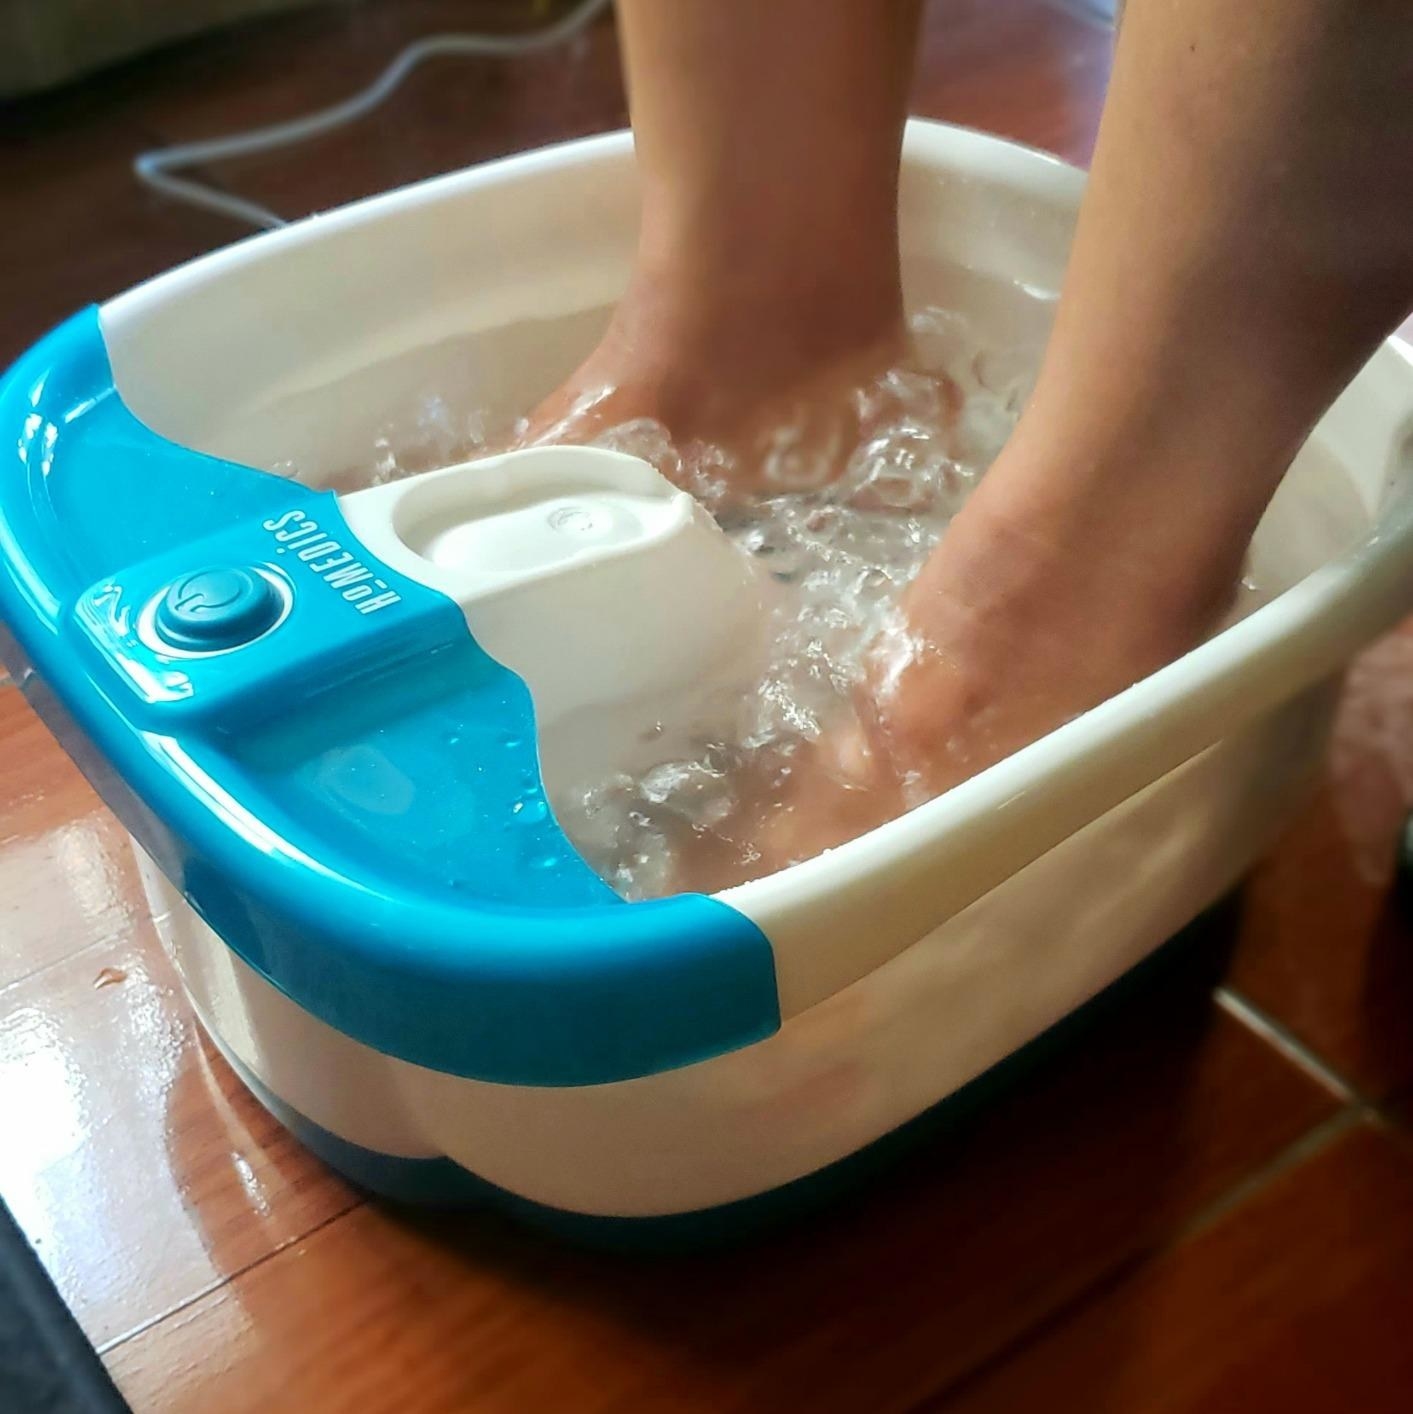 Reviewer using the foot spa with bubbling water inside